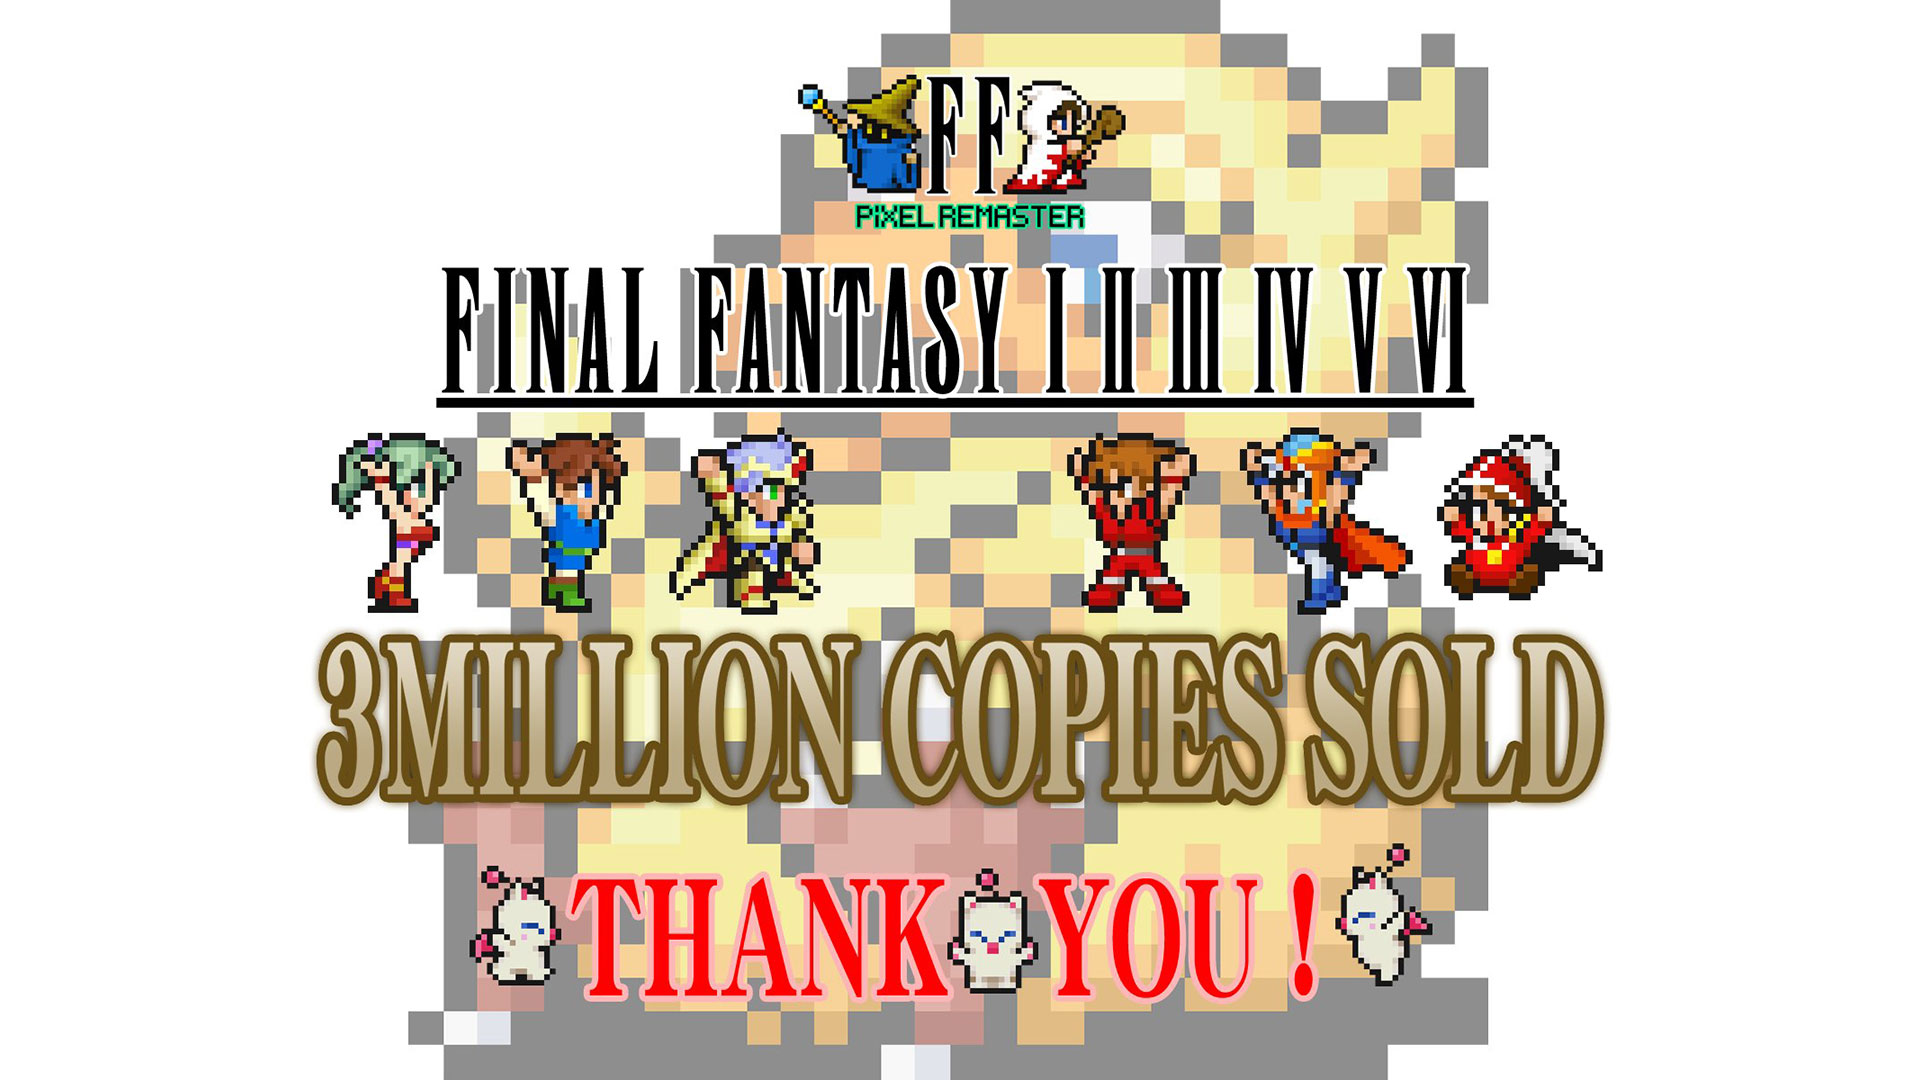 Final Fantasy Pixel Remaster has reached 3 million copies sold